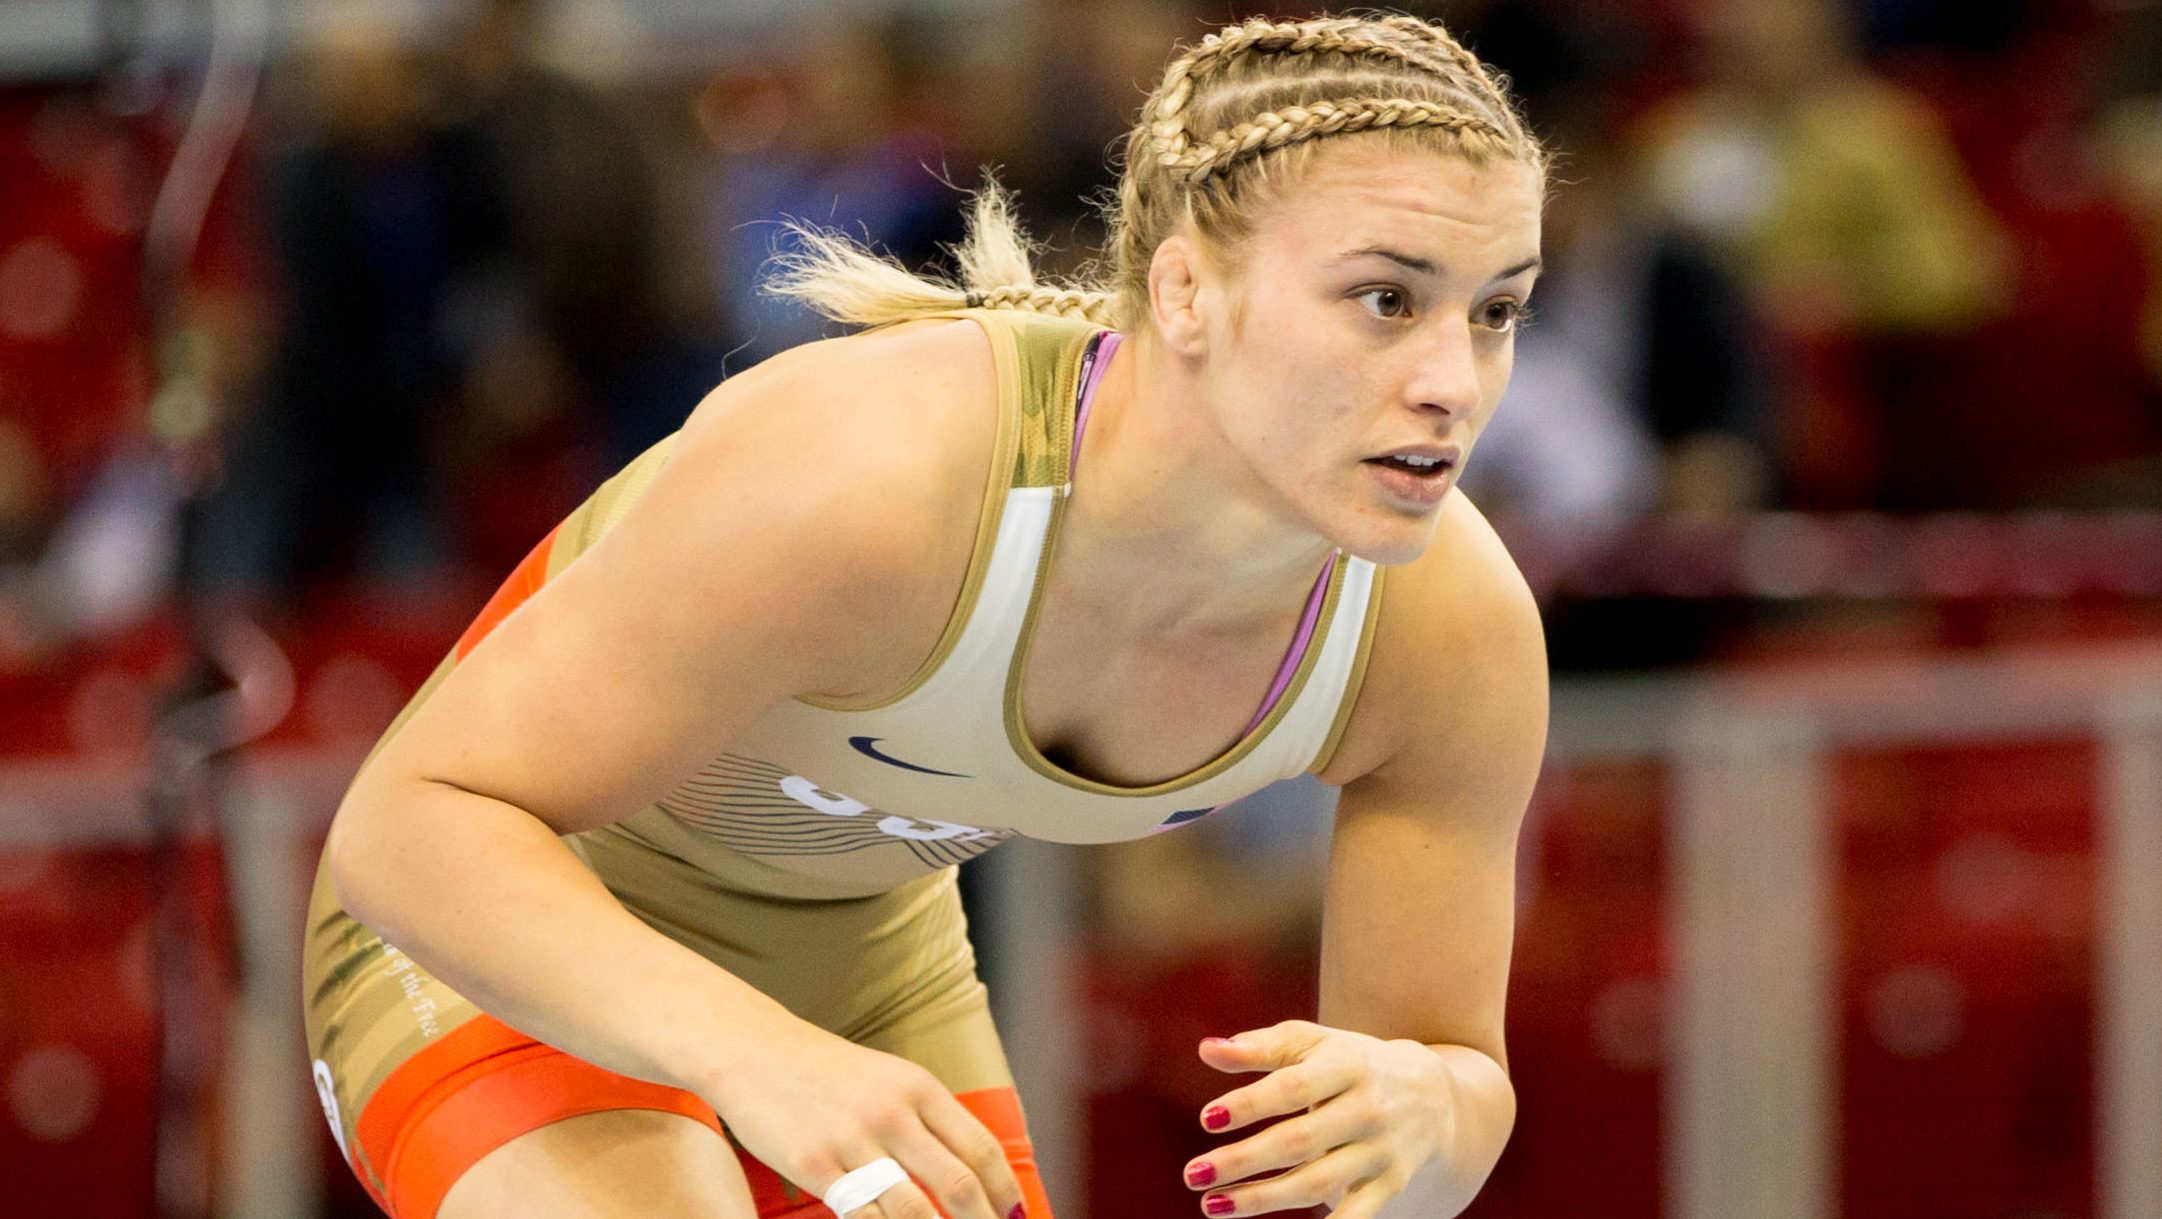 Helen Maroulis gets in position before a wrestling match.